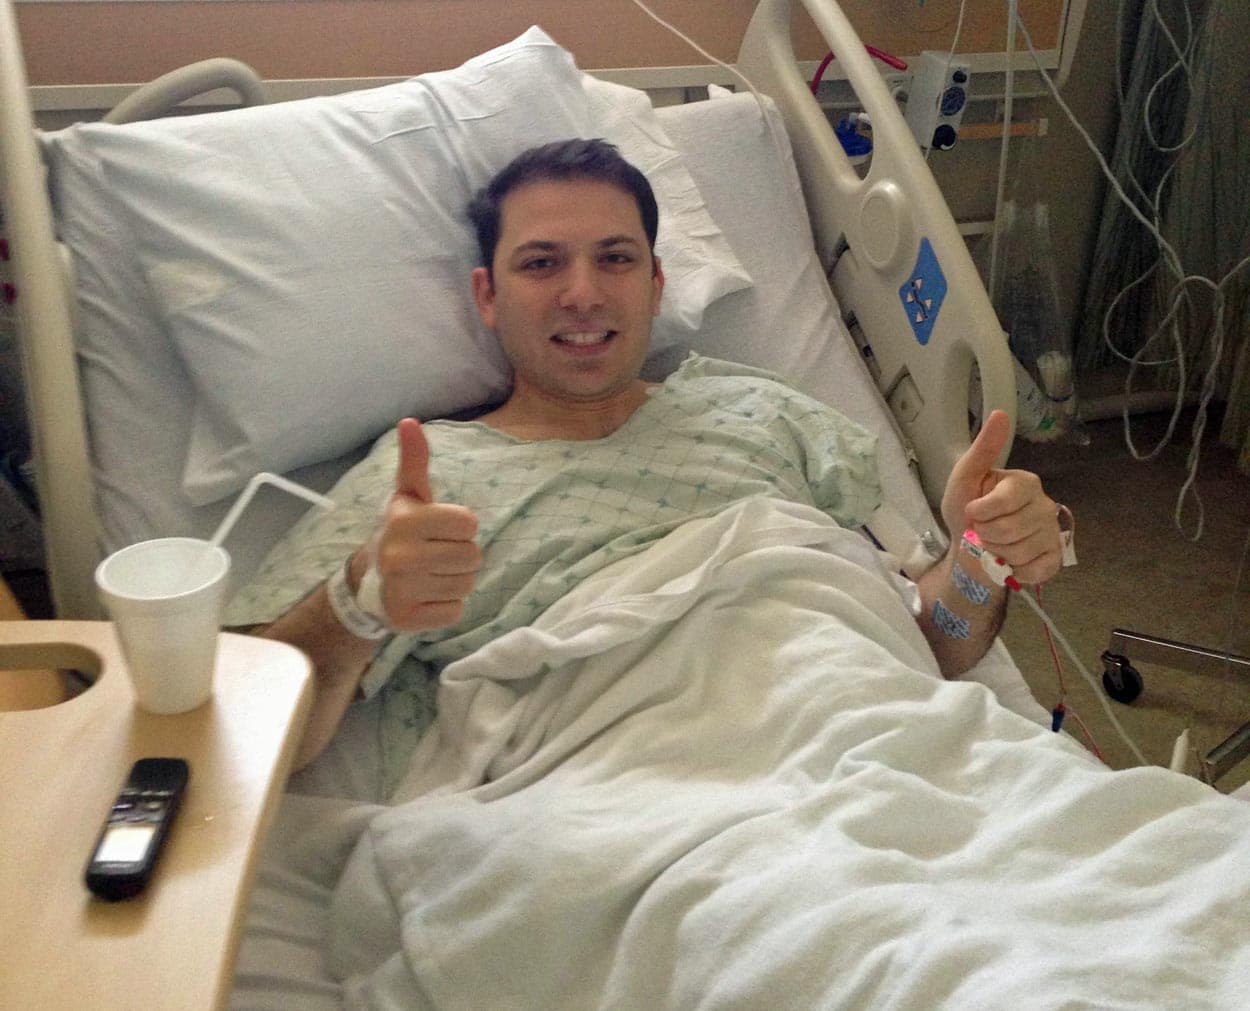 David Cavell is still groggy after surgery, looking forward to ice chips and crackers. (Courtesy)